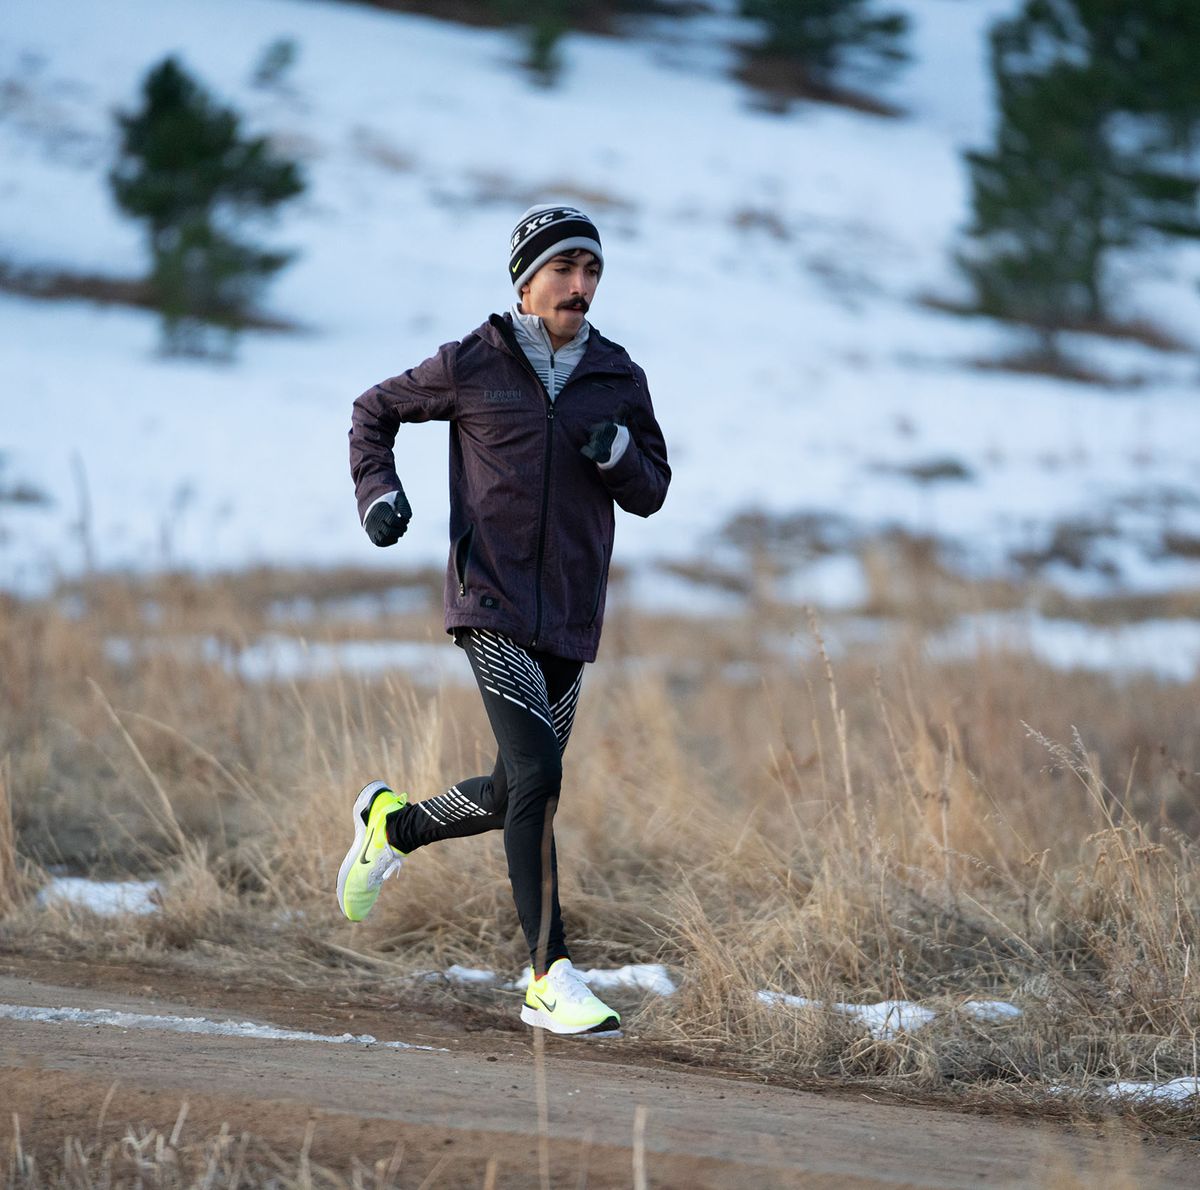 The Best Men's Running Pants for Cold-Weather Runs and Workouts